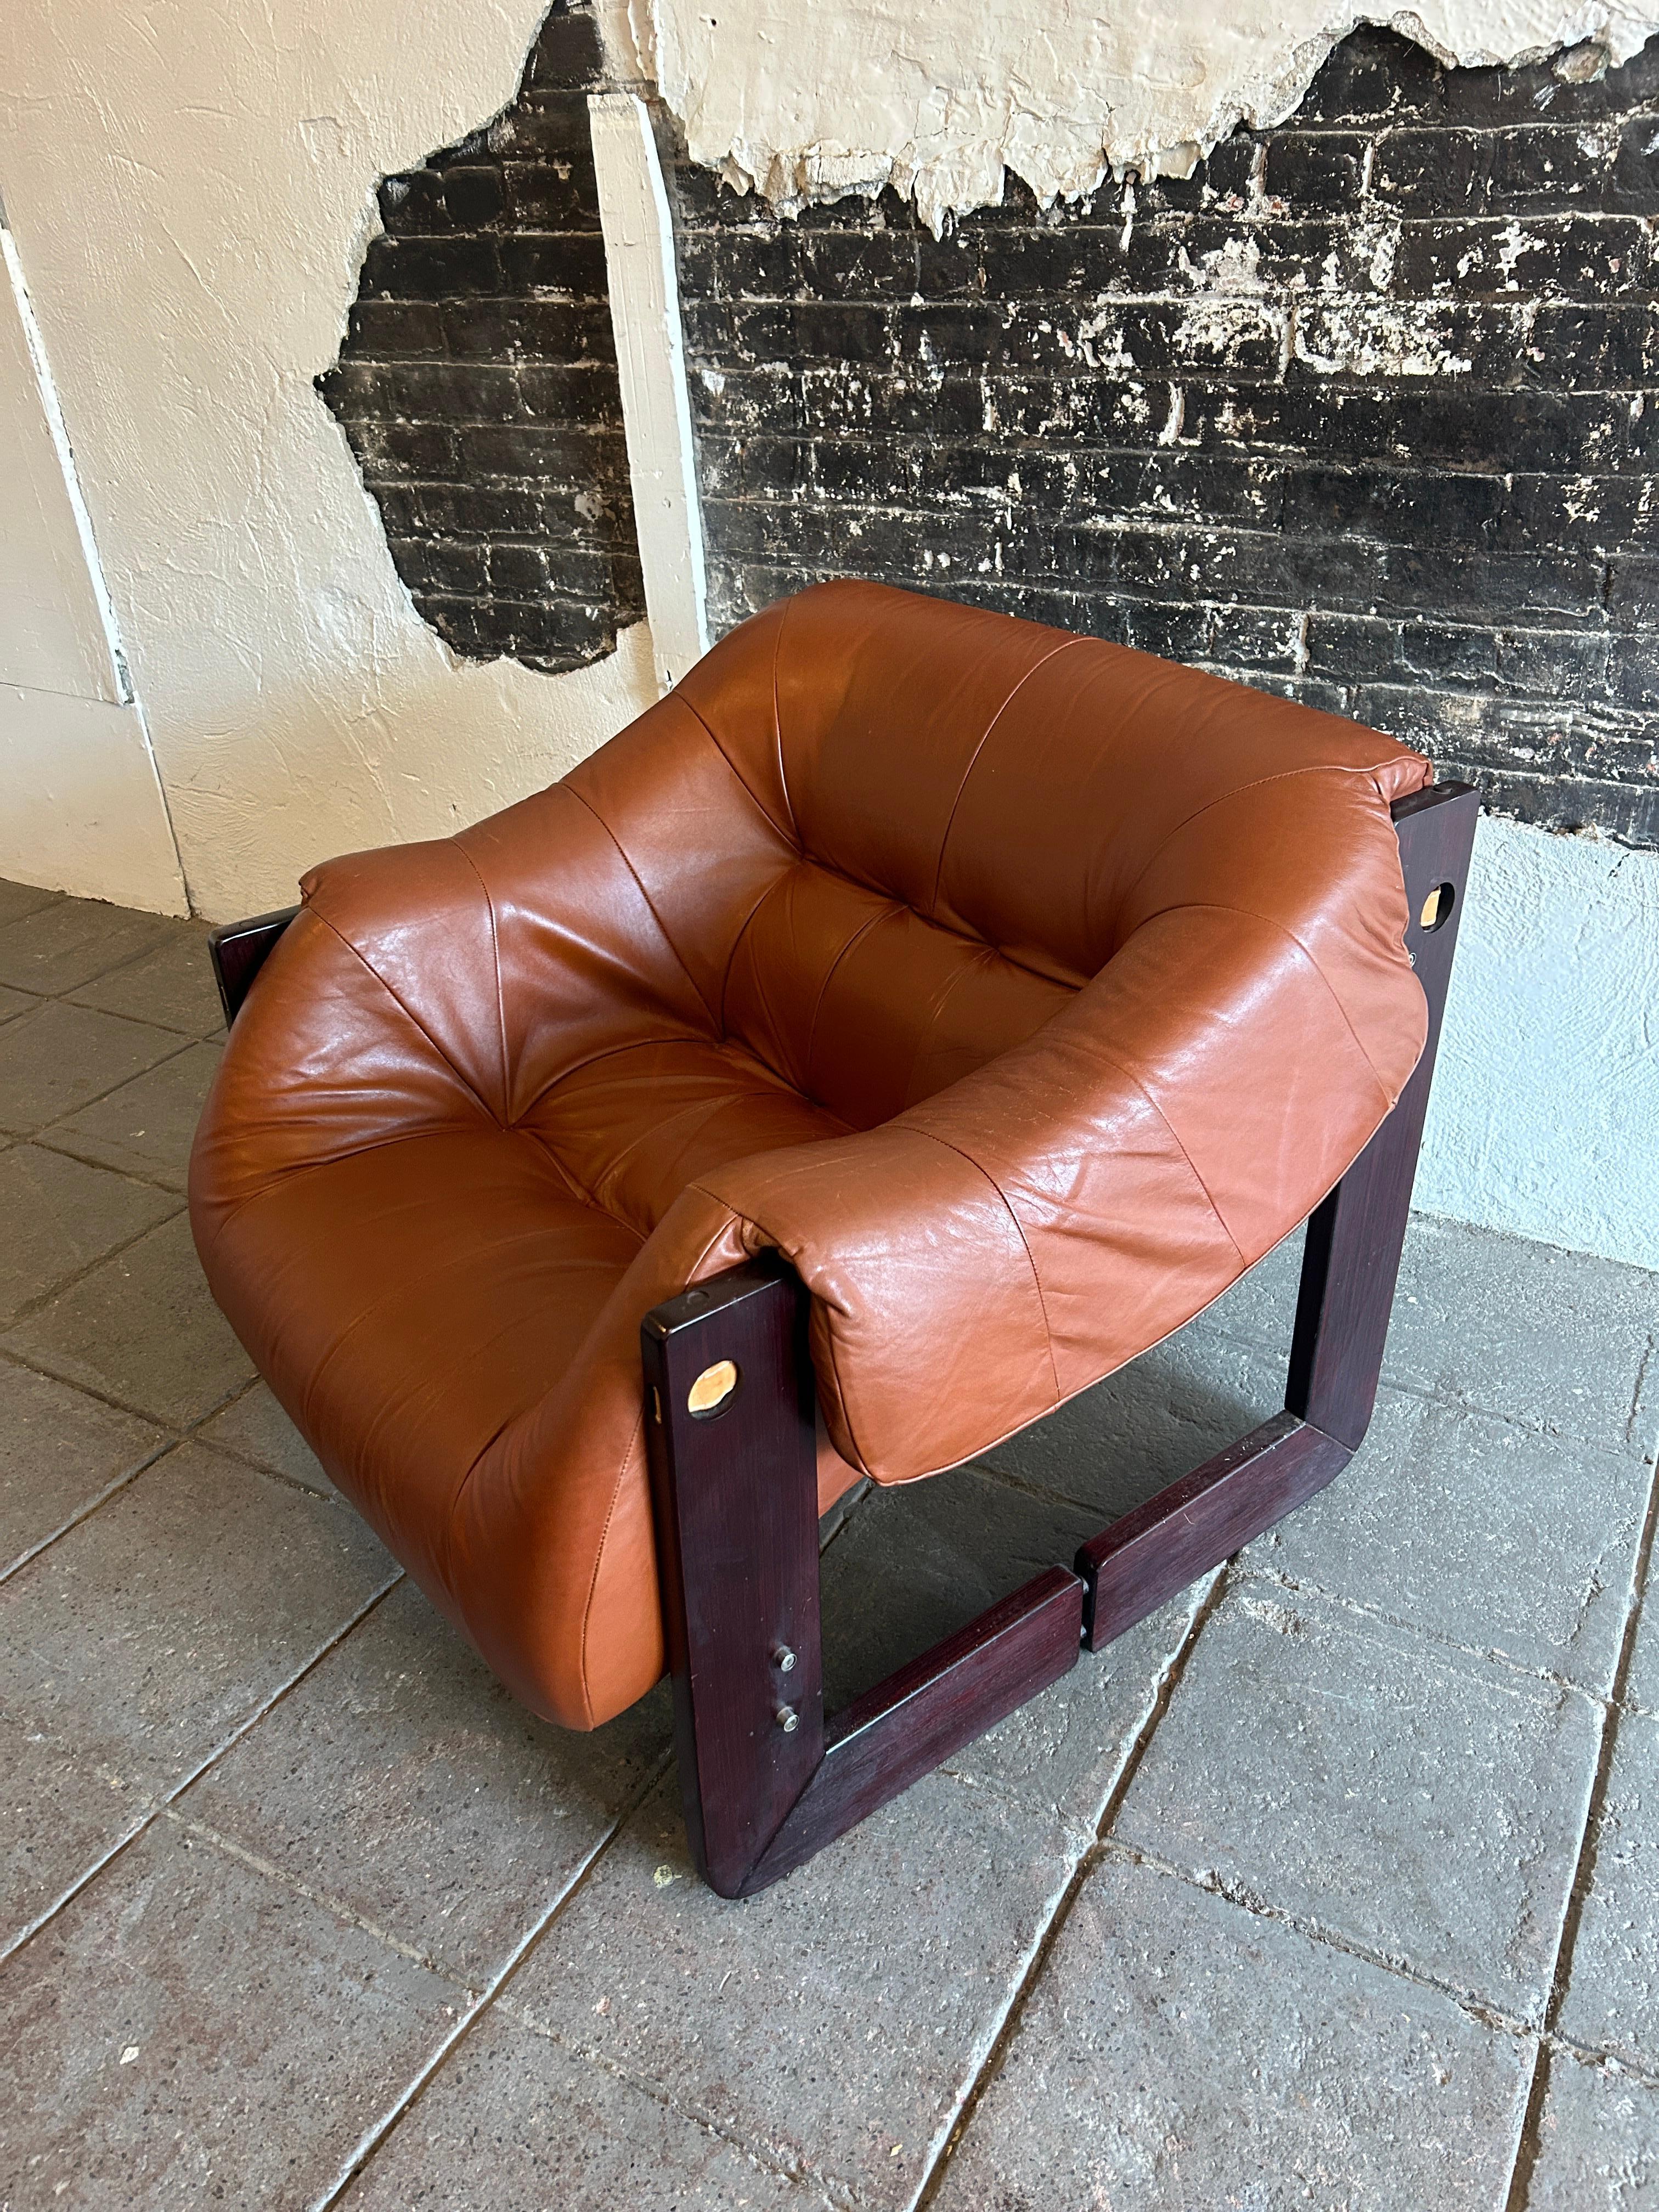 Superb cognac all original leather lounge chair by Percival Lafer - model MP-97. This beautiful chair is made of a Brazilian hardwood frame with saddle leather straps and a cognac leather cushion. The seat cushions are all original beautiful cognac